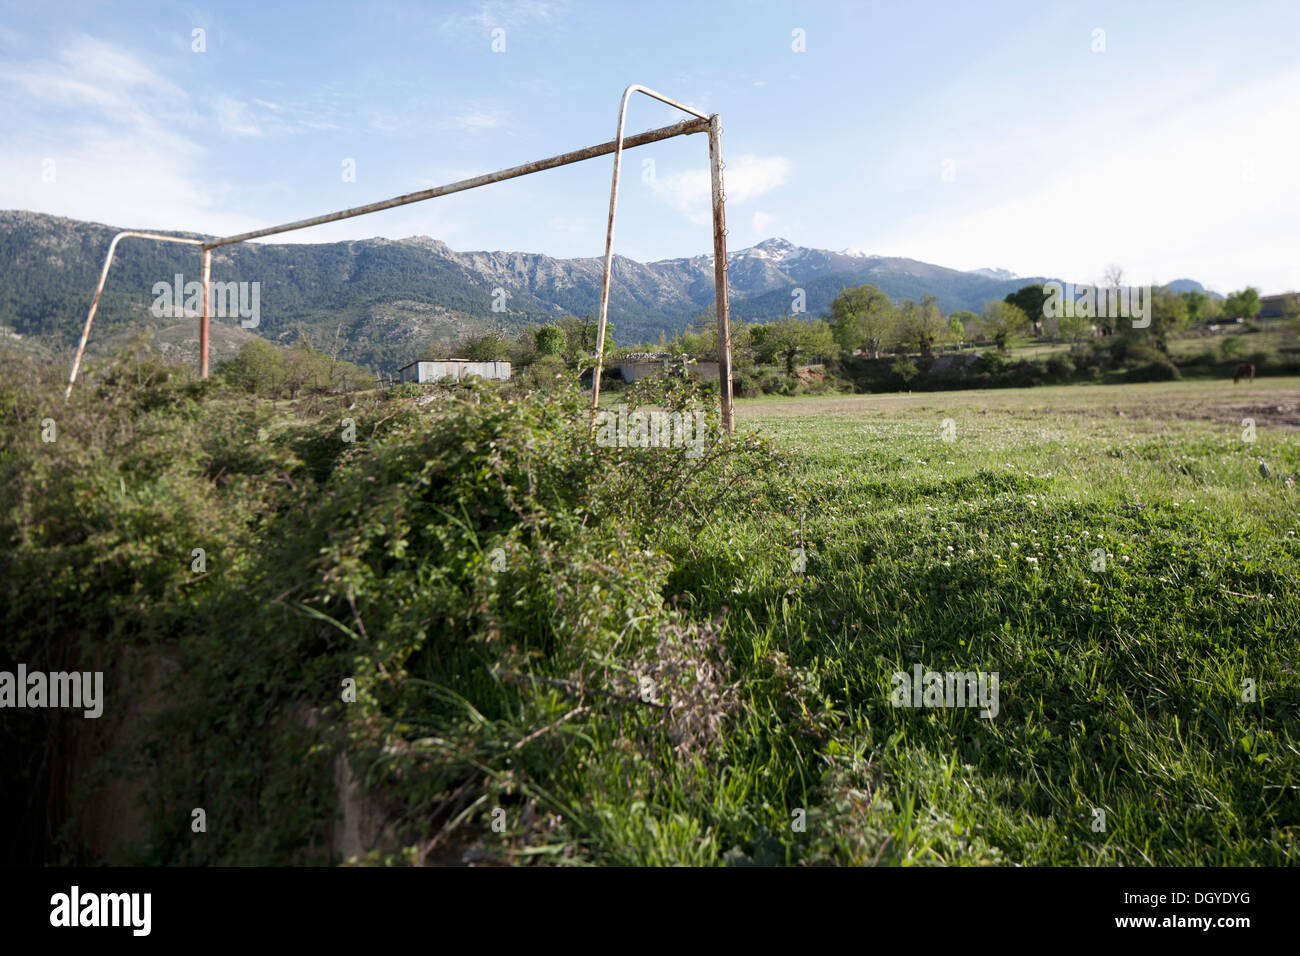 An old soccer goal post, mountains in background, Calacuccia, Corsica, France Stock Photo